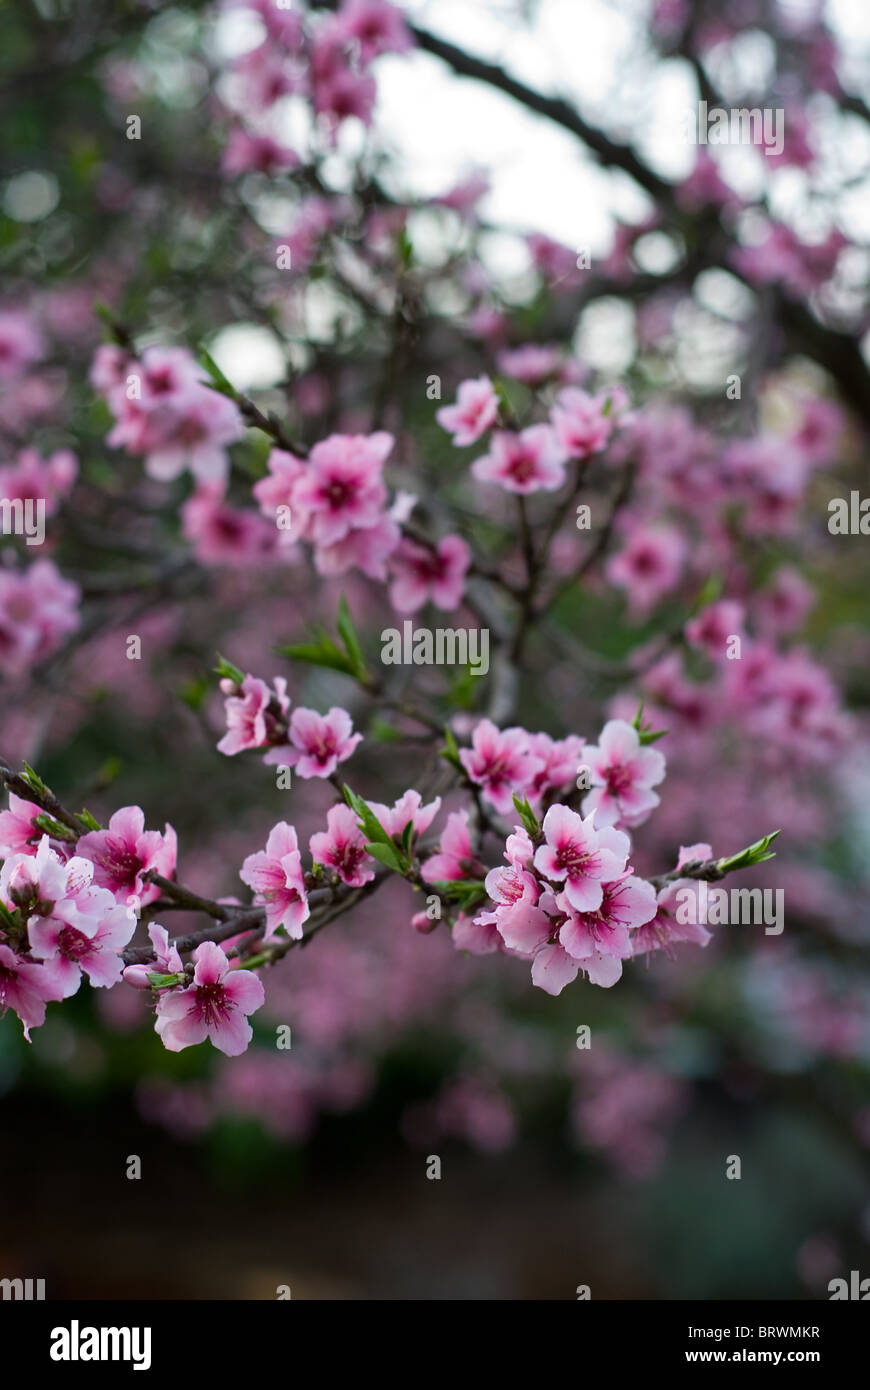 Peach tree with blossoms in full bloom. Stock Photo